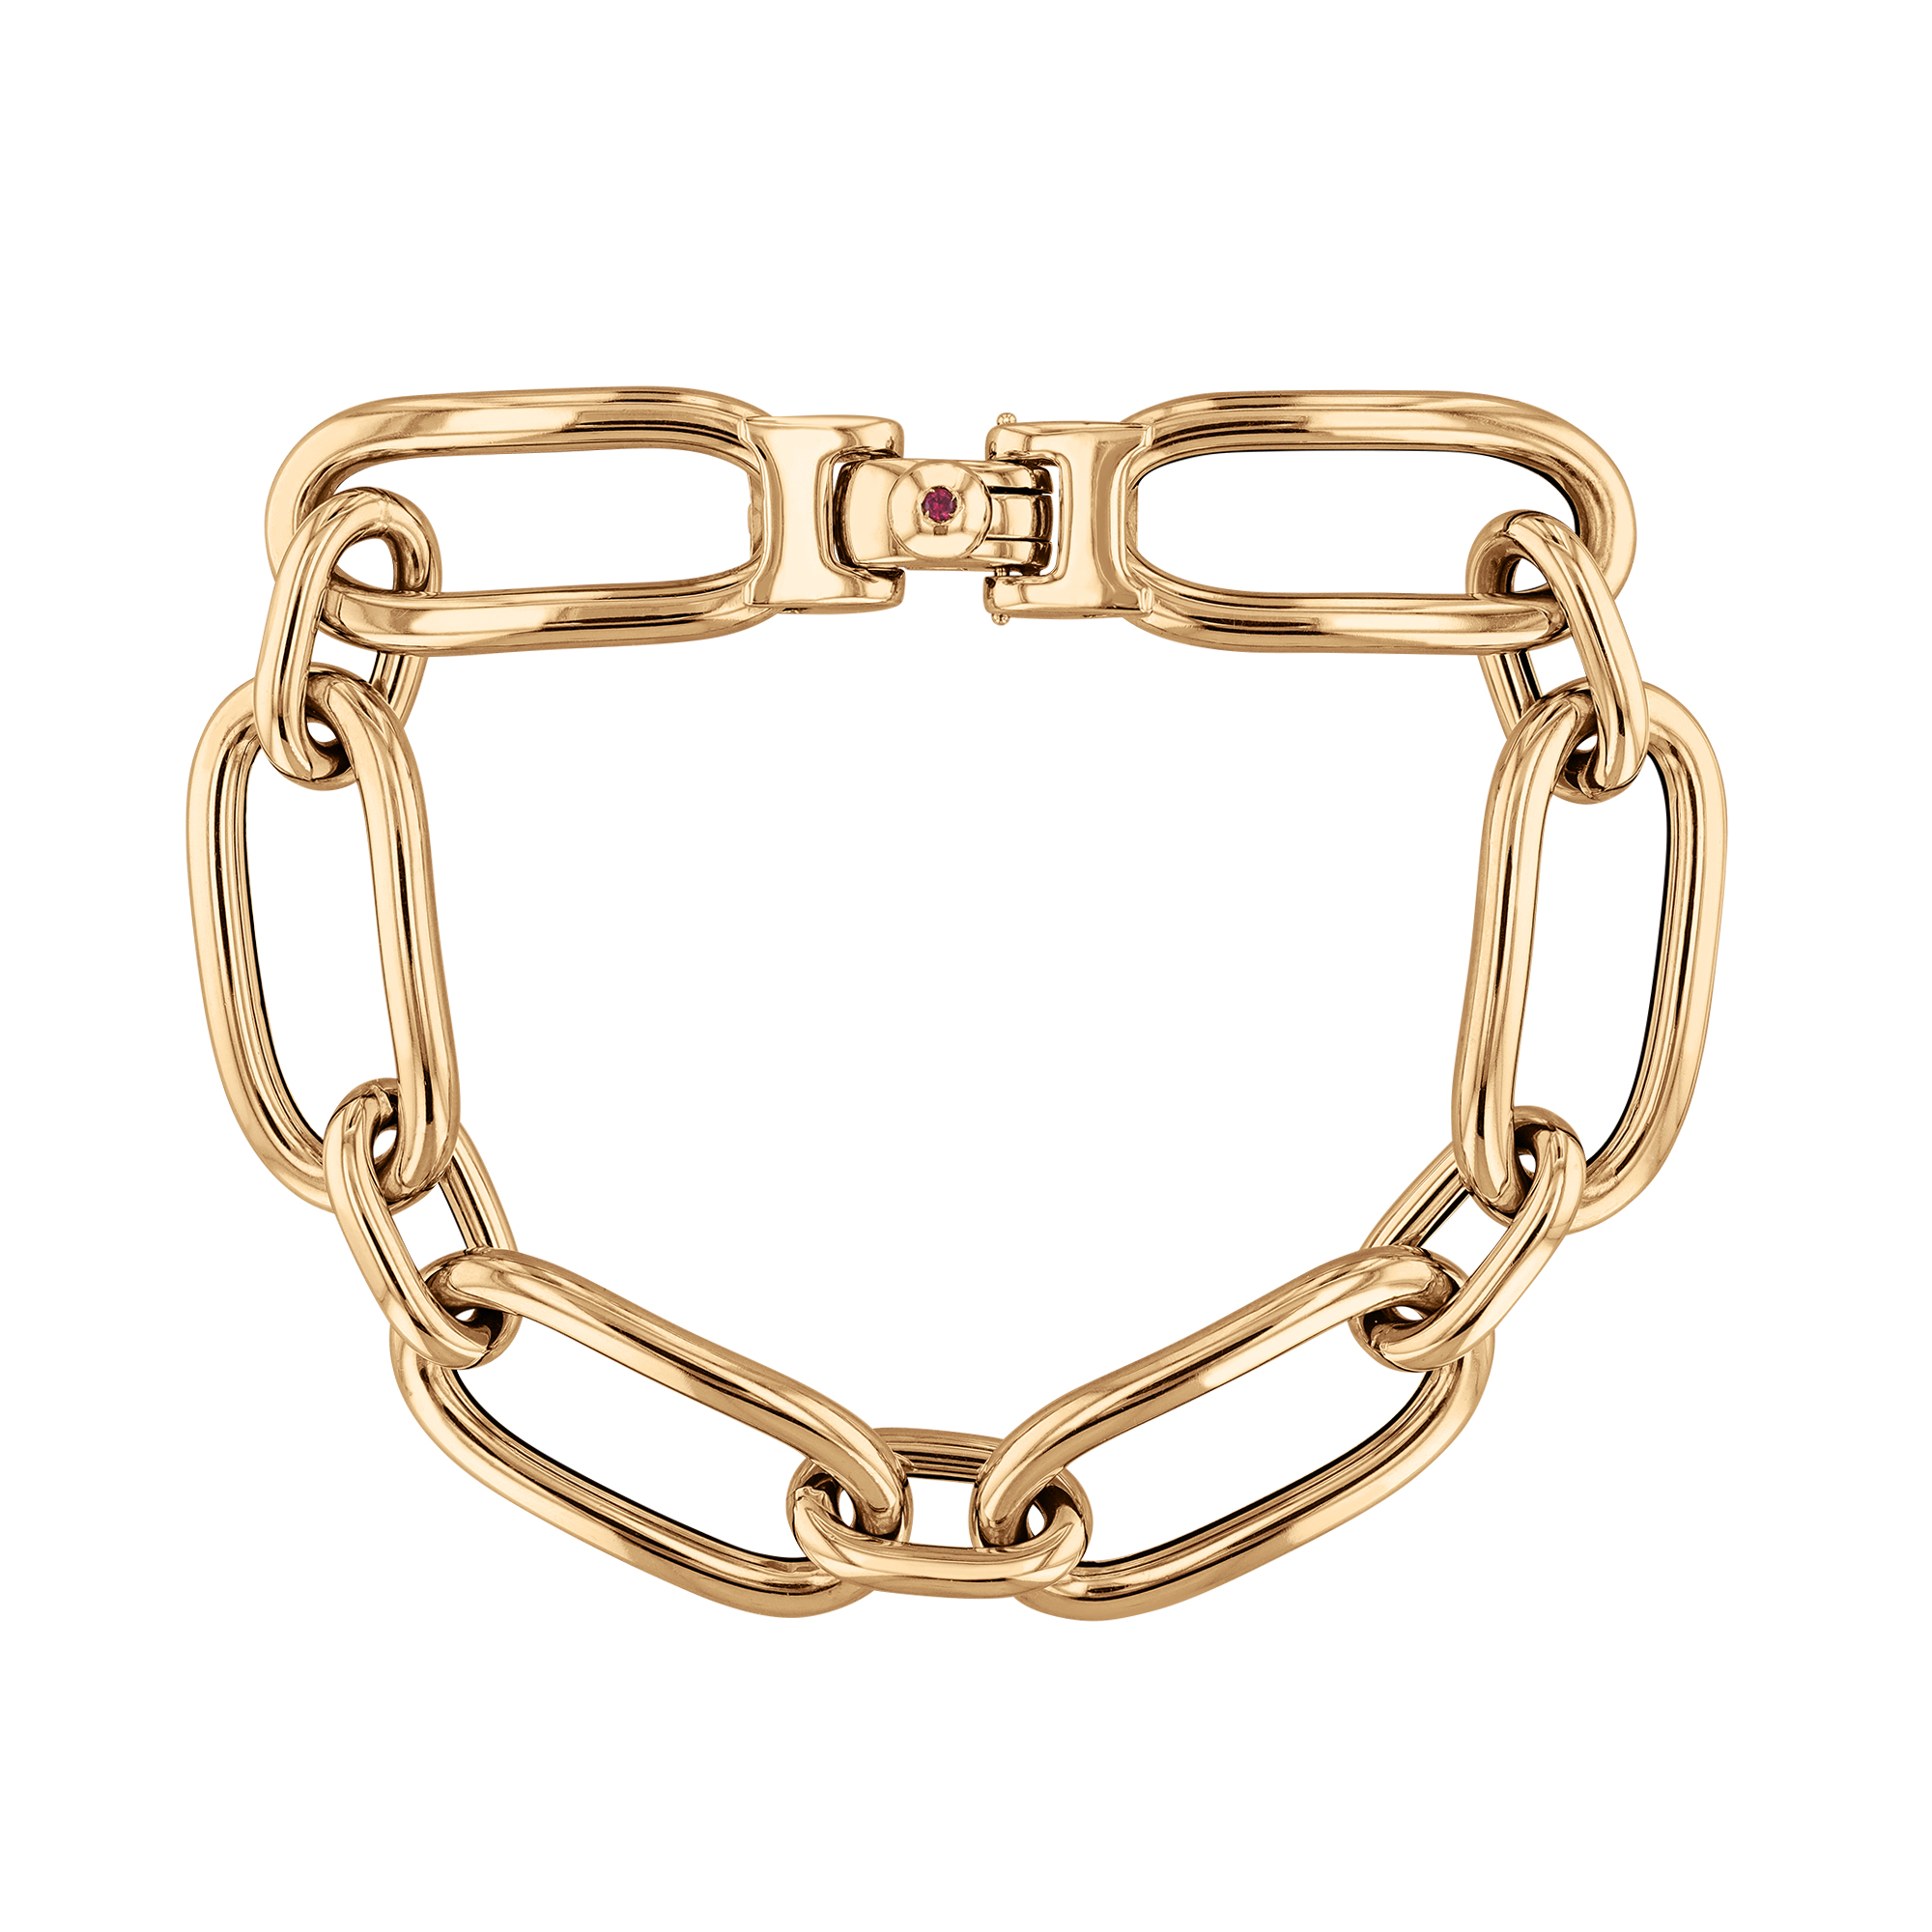 Roberto Coin Designer Yellow Gold Large Link Bracelet | 7 Inches -  5310197AYLB0